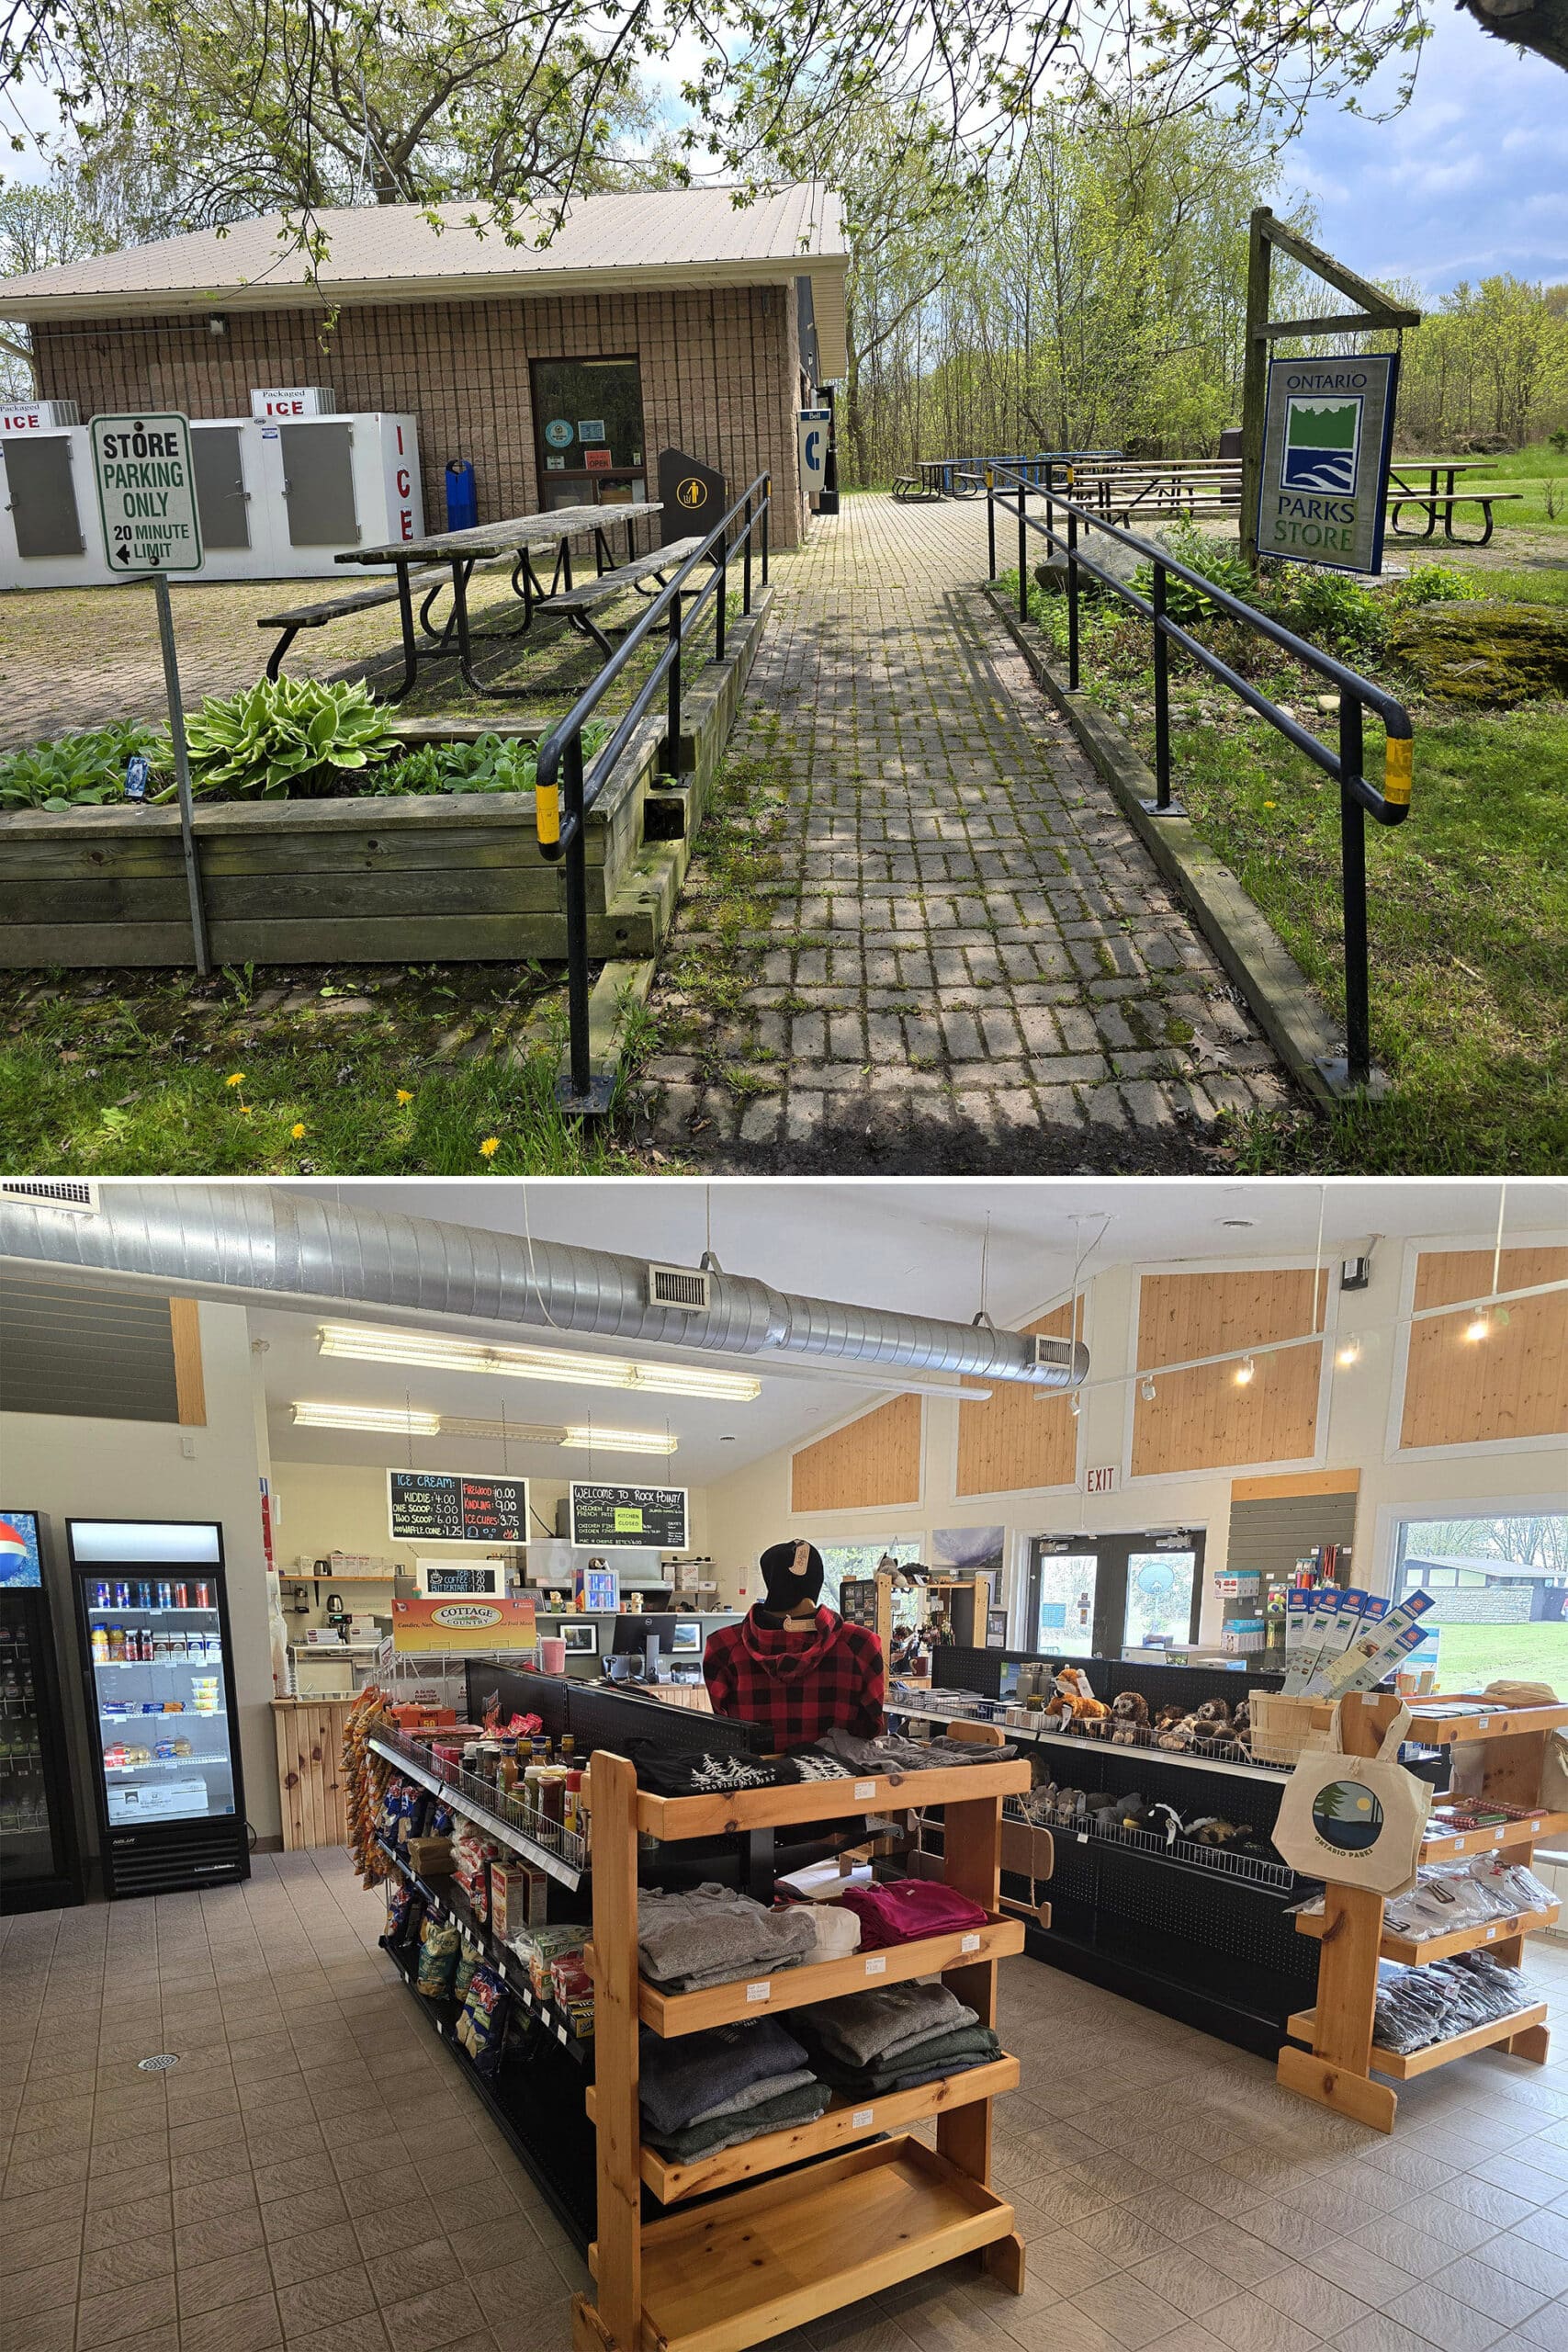 2 part image showing the interior and exterior of the Rock Point Park store.